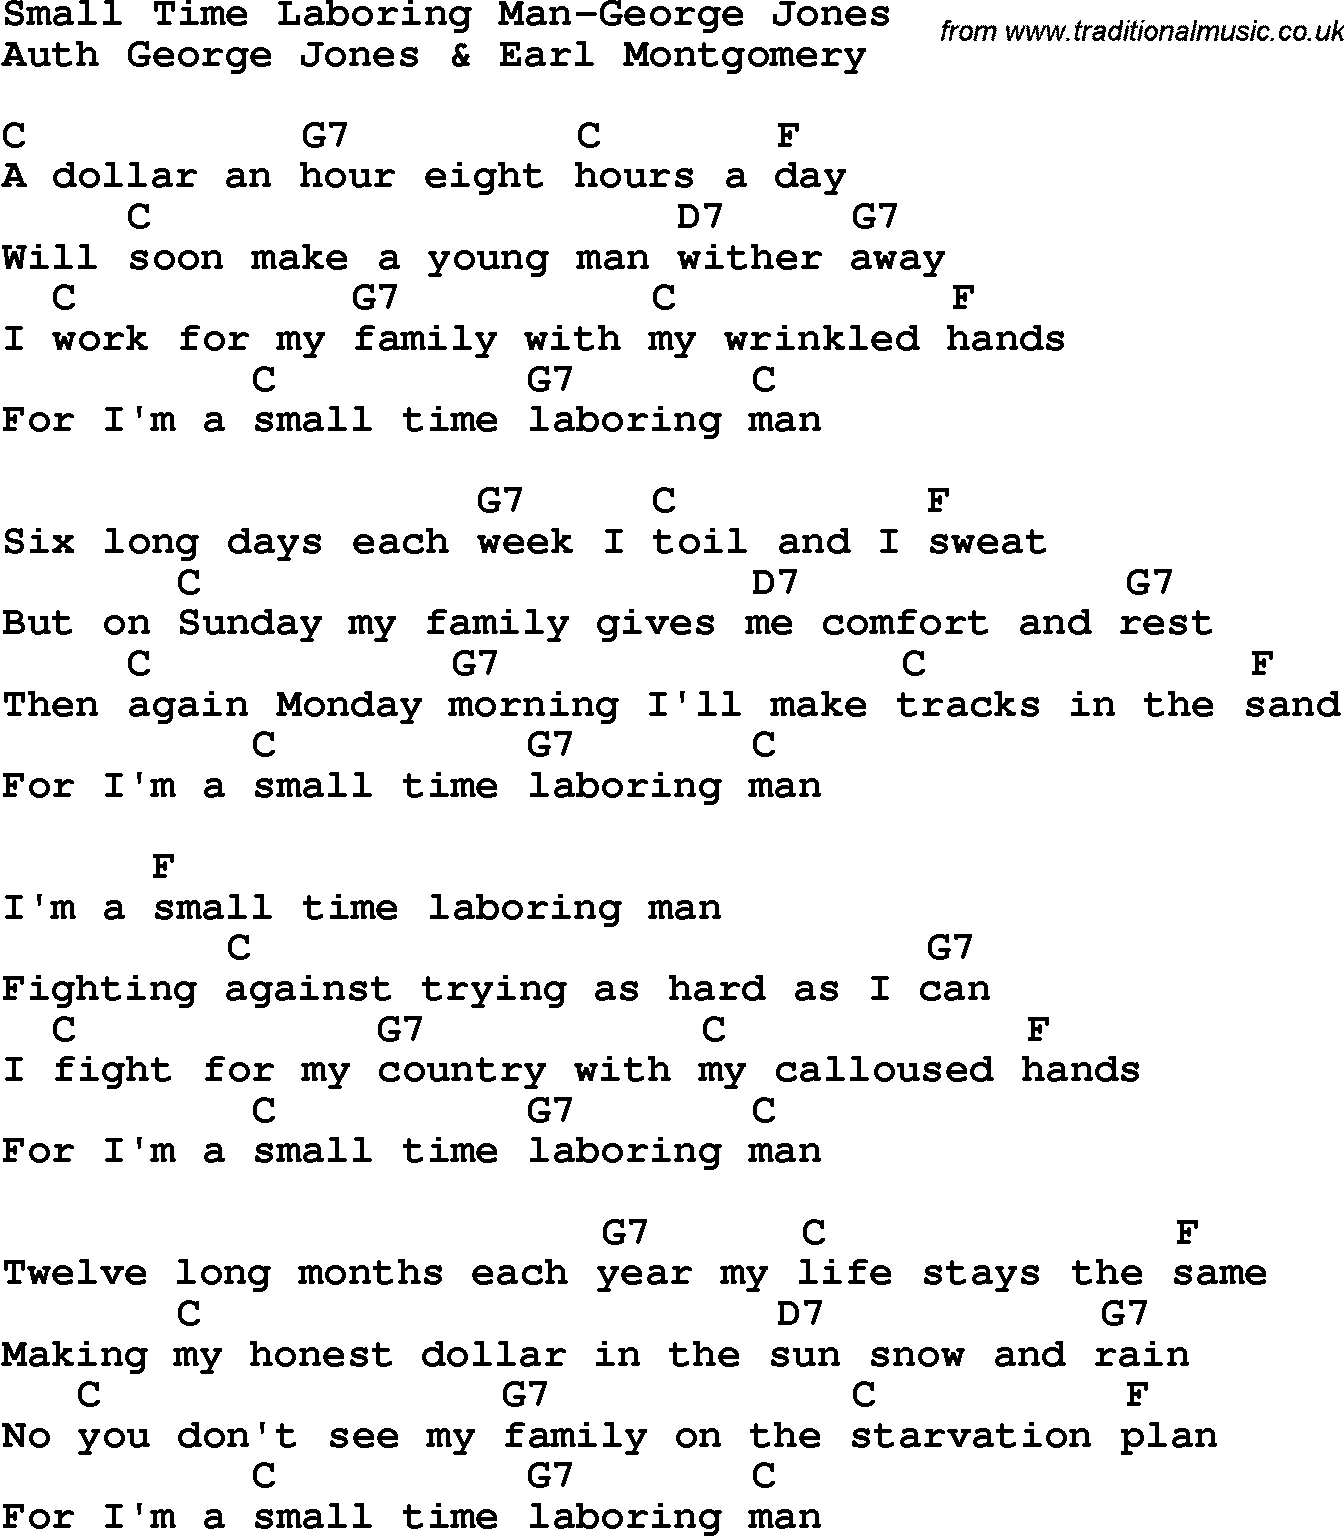 Country, Southern and Bluegrass Gospel Song Small Time Laboring Man-George Jones lyrics and chords